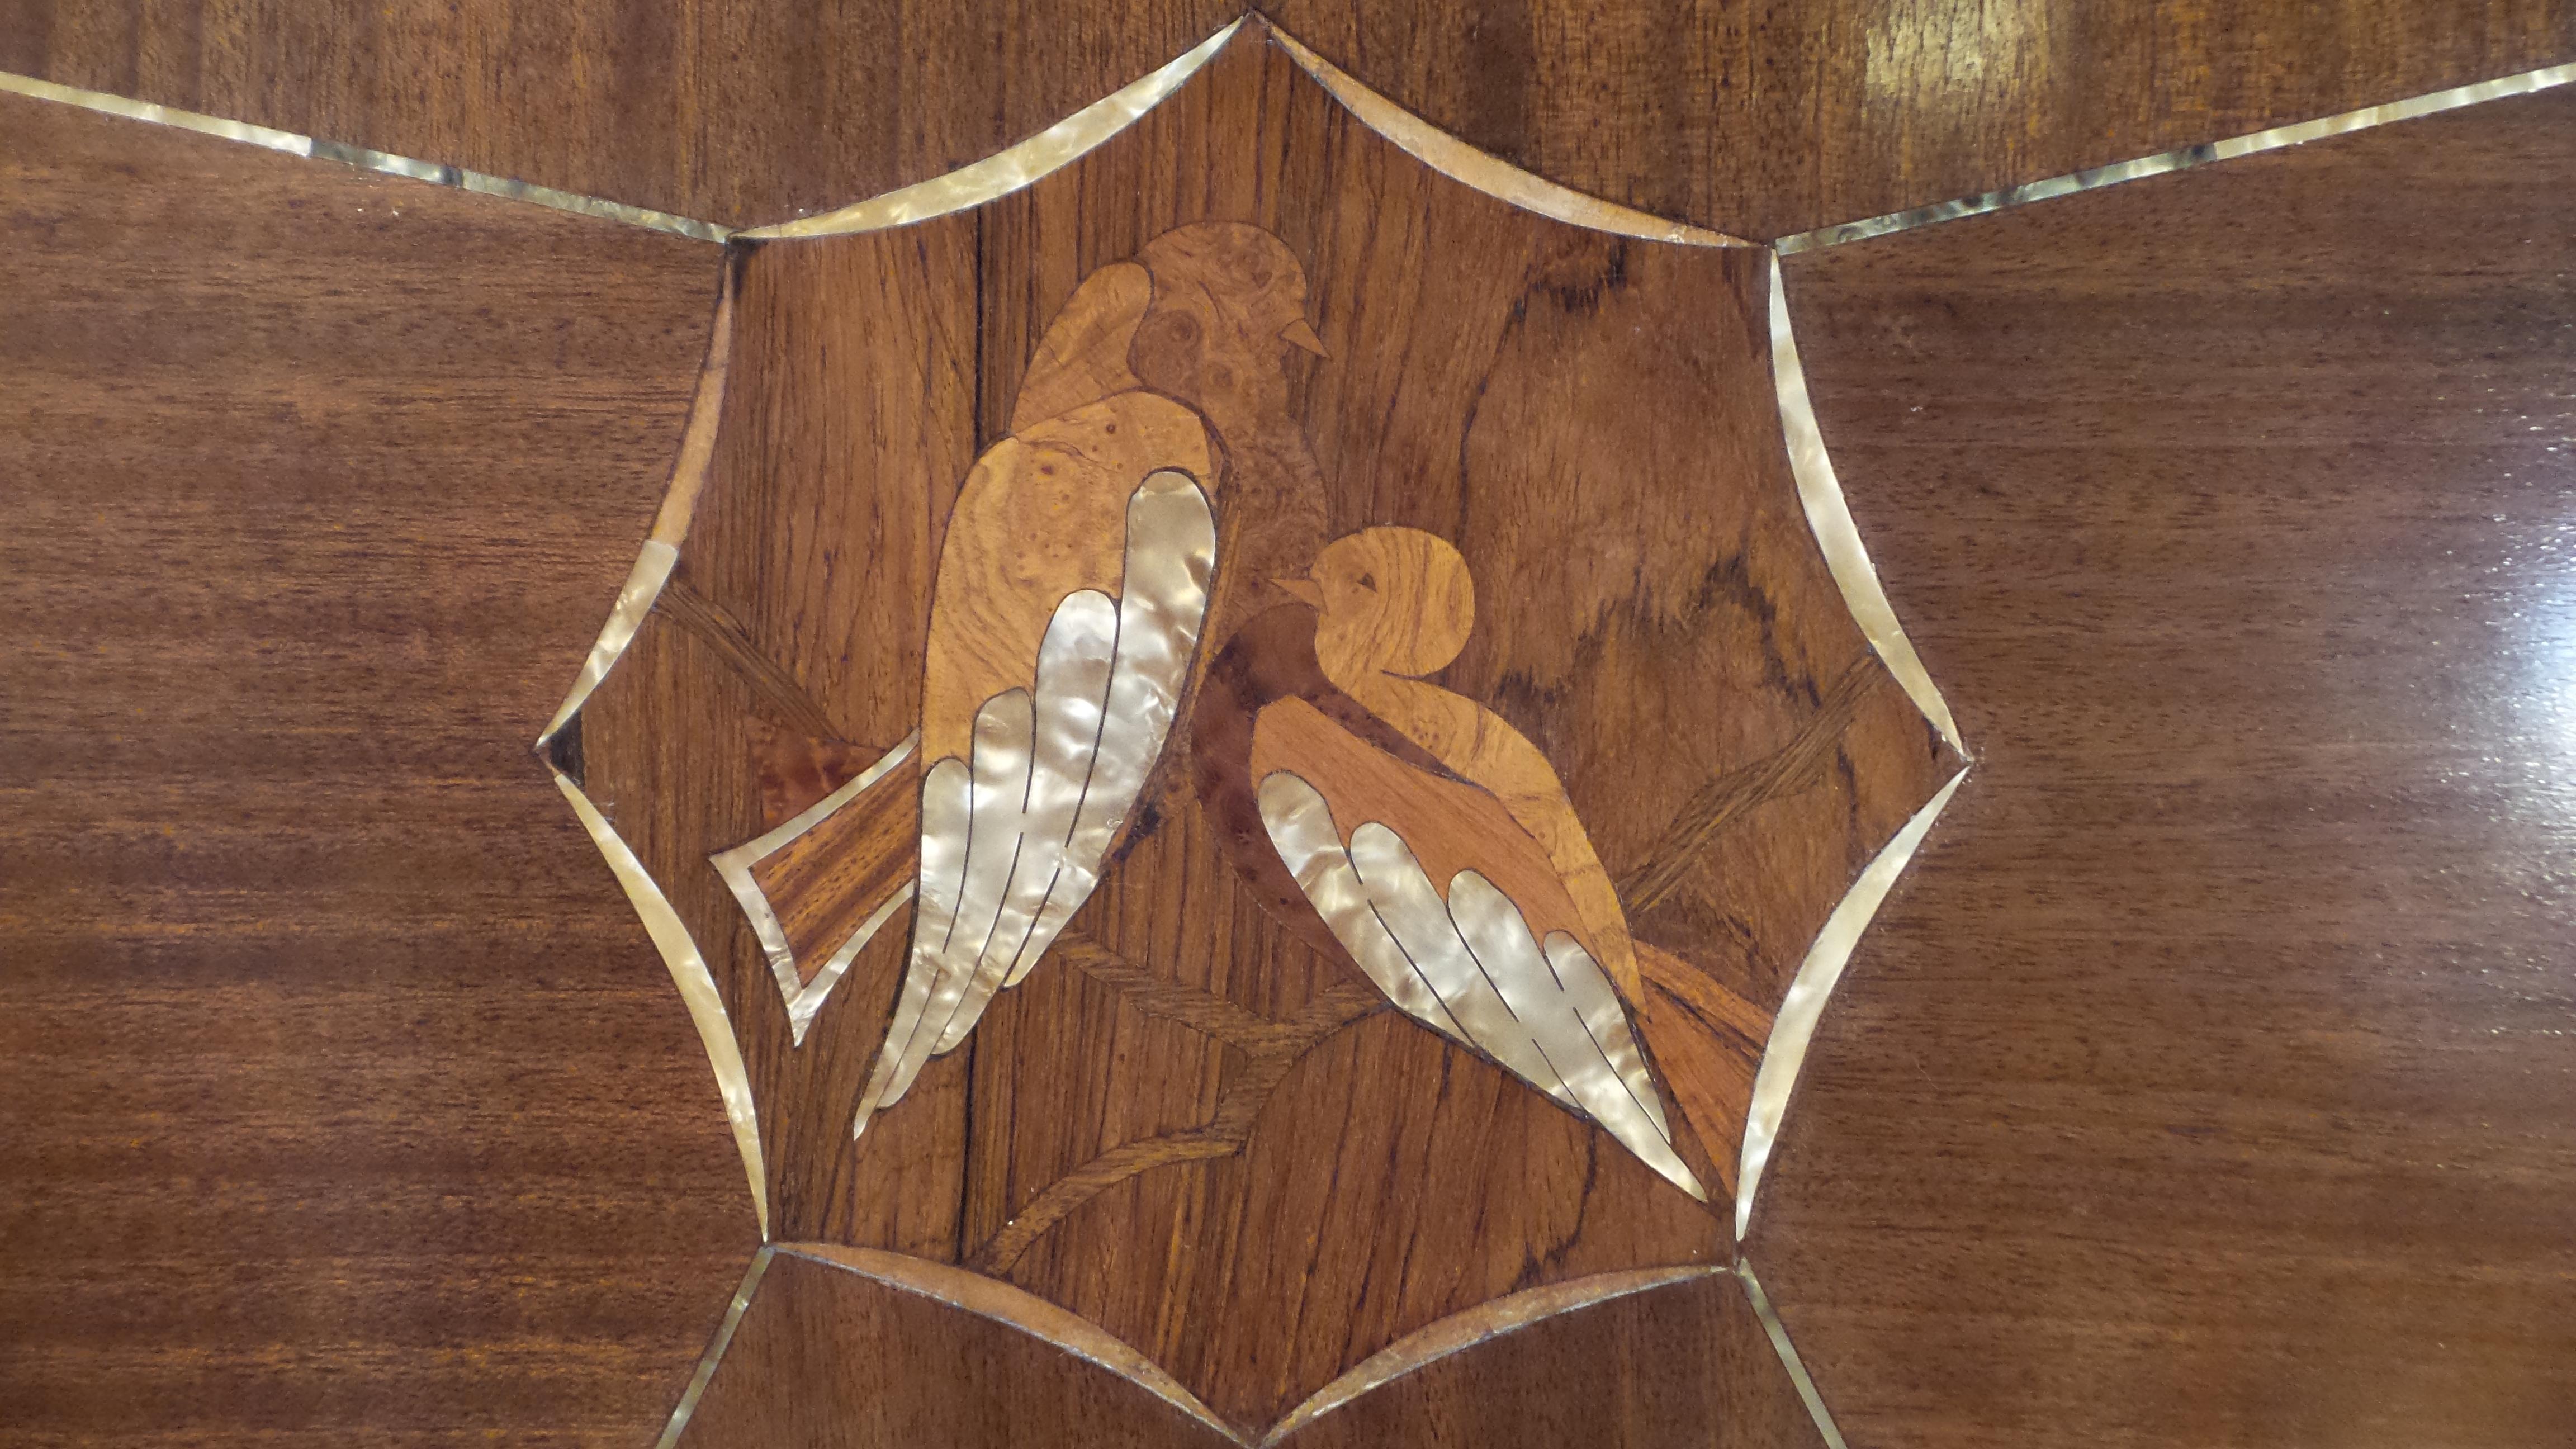 An incredibly stunning original Art Deco double bed in walnut, boxwood and mother of pearl. The shape is iconic of the era.
The theme is of lovebirds and the beautifully detailed birds inlaid into this furniture has wings of mother of pearl,